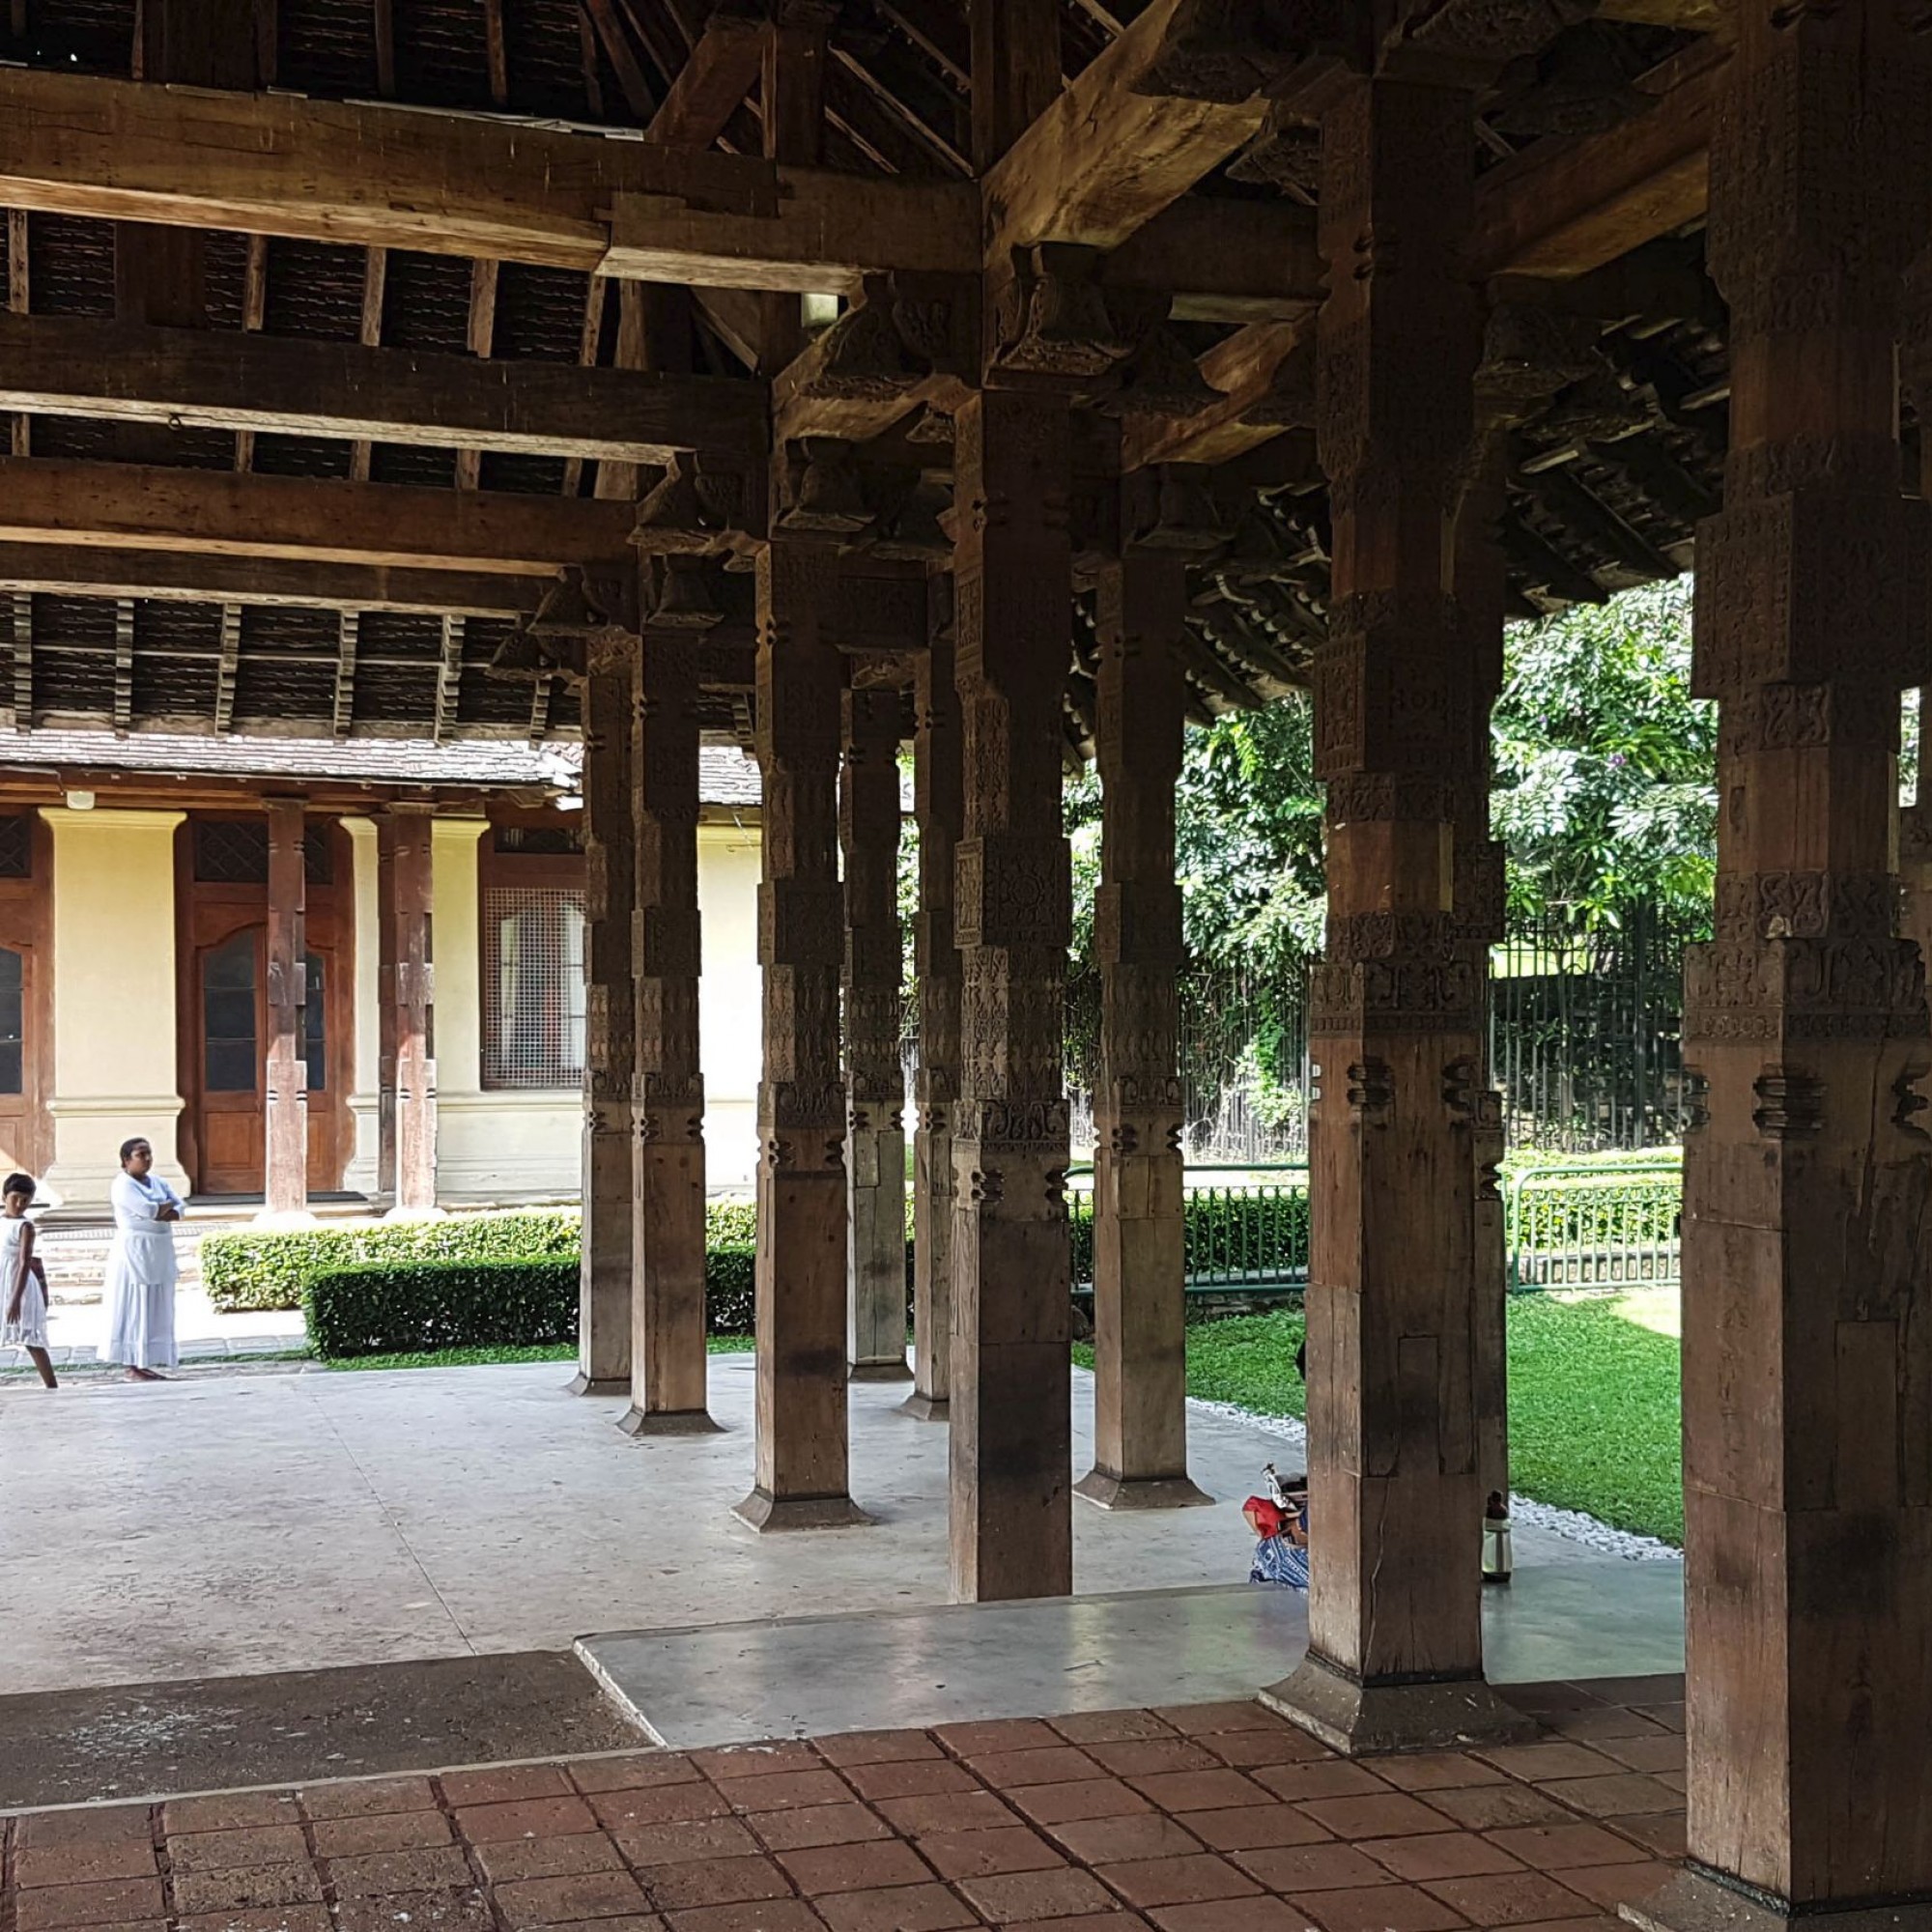 Sri Lanka: Audienzhalle im Temple of the Sacred Tooth Relic